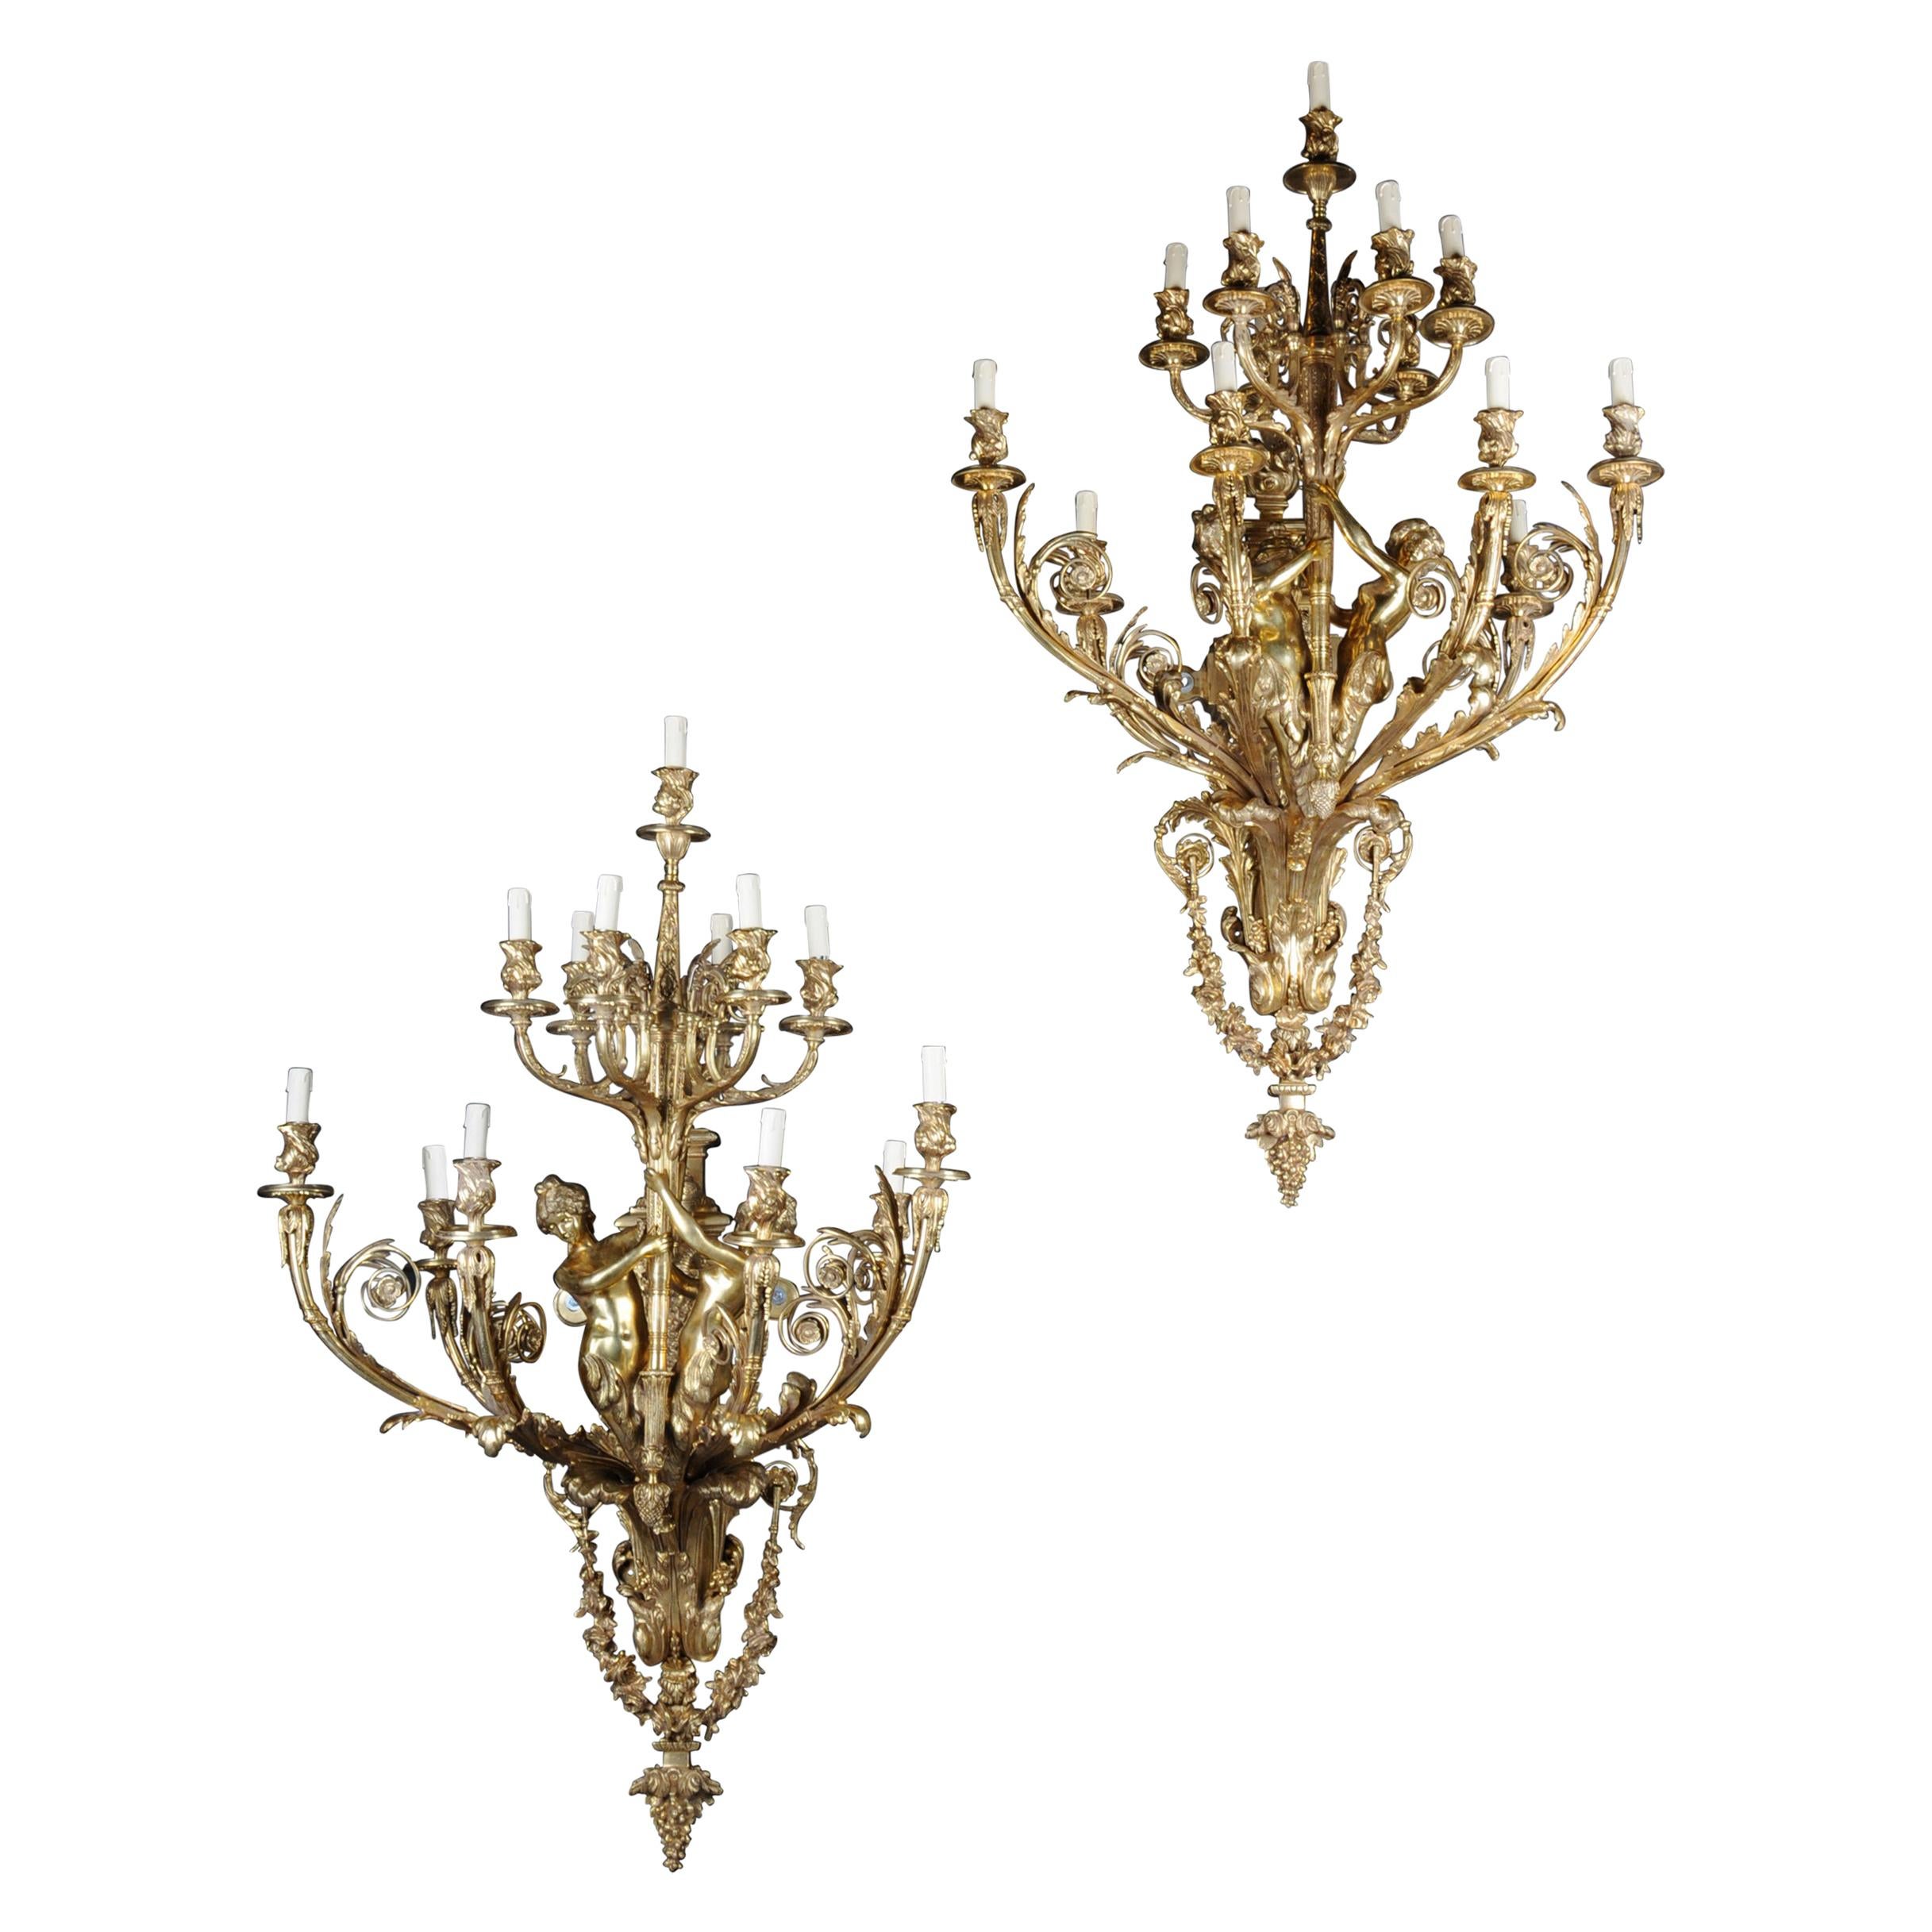 Pair of Monumental Wall Appliques Napoleon III After J.-B. Klagmann For Sale